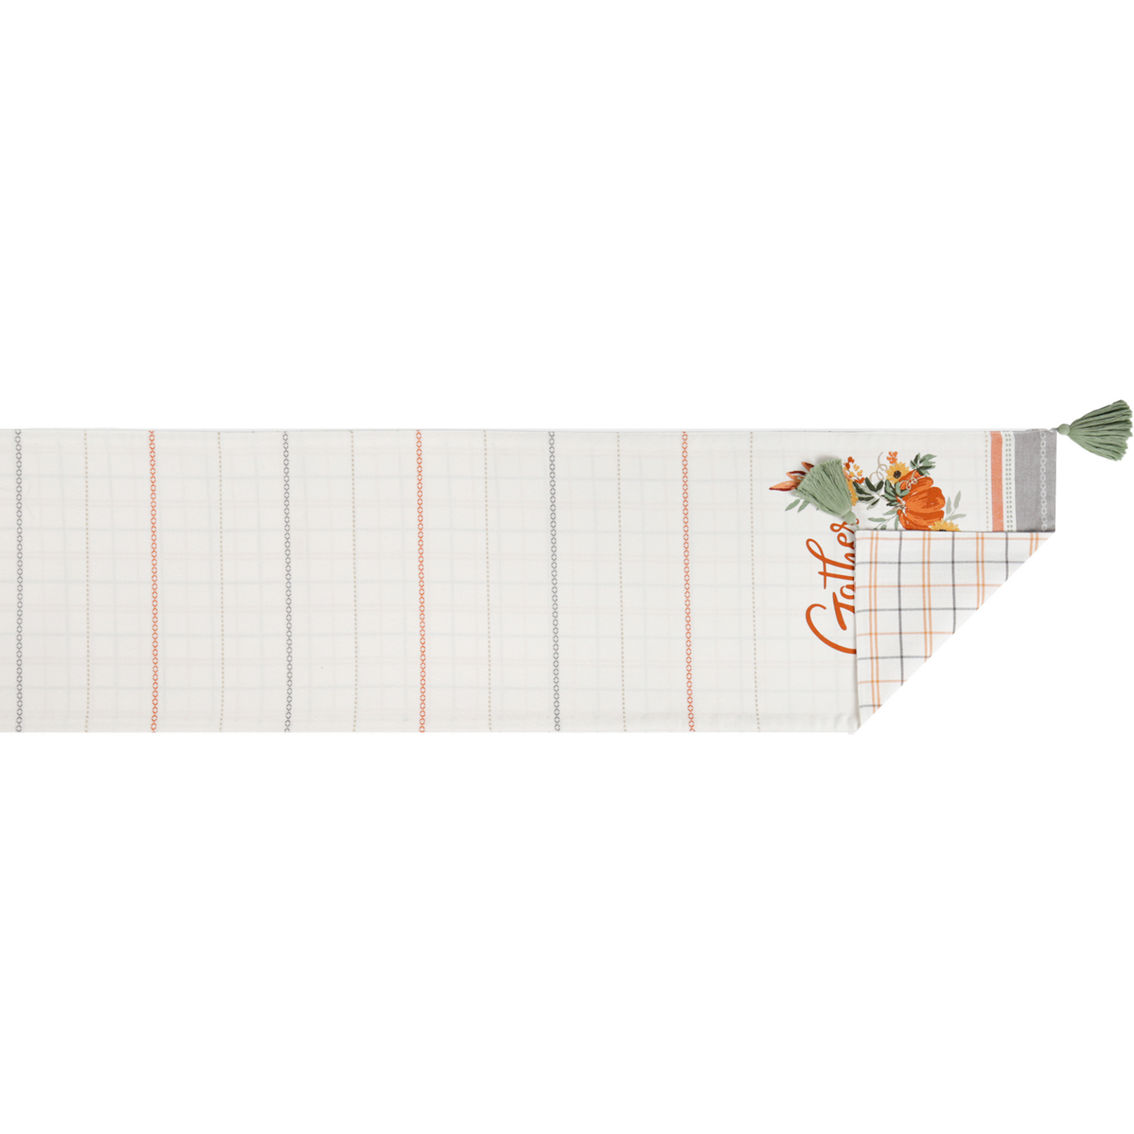 Design Imports 14 x 72 in. Gather Fall Squash Reversible Table Runner - Image 5 of 10